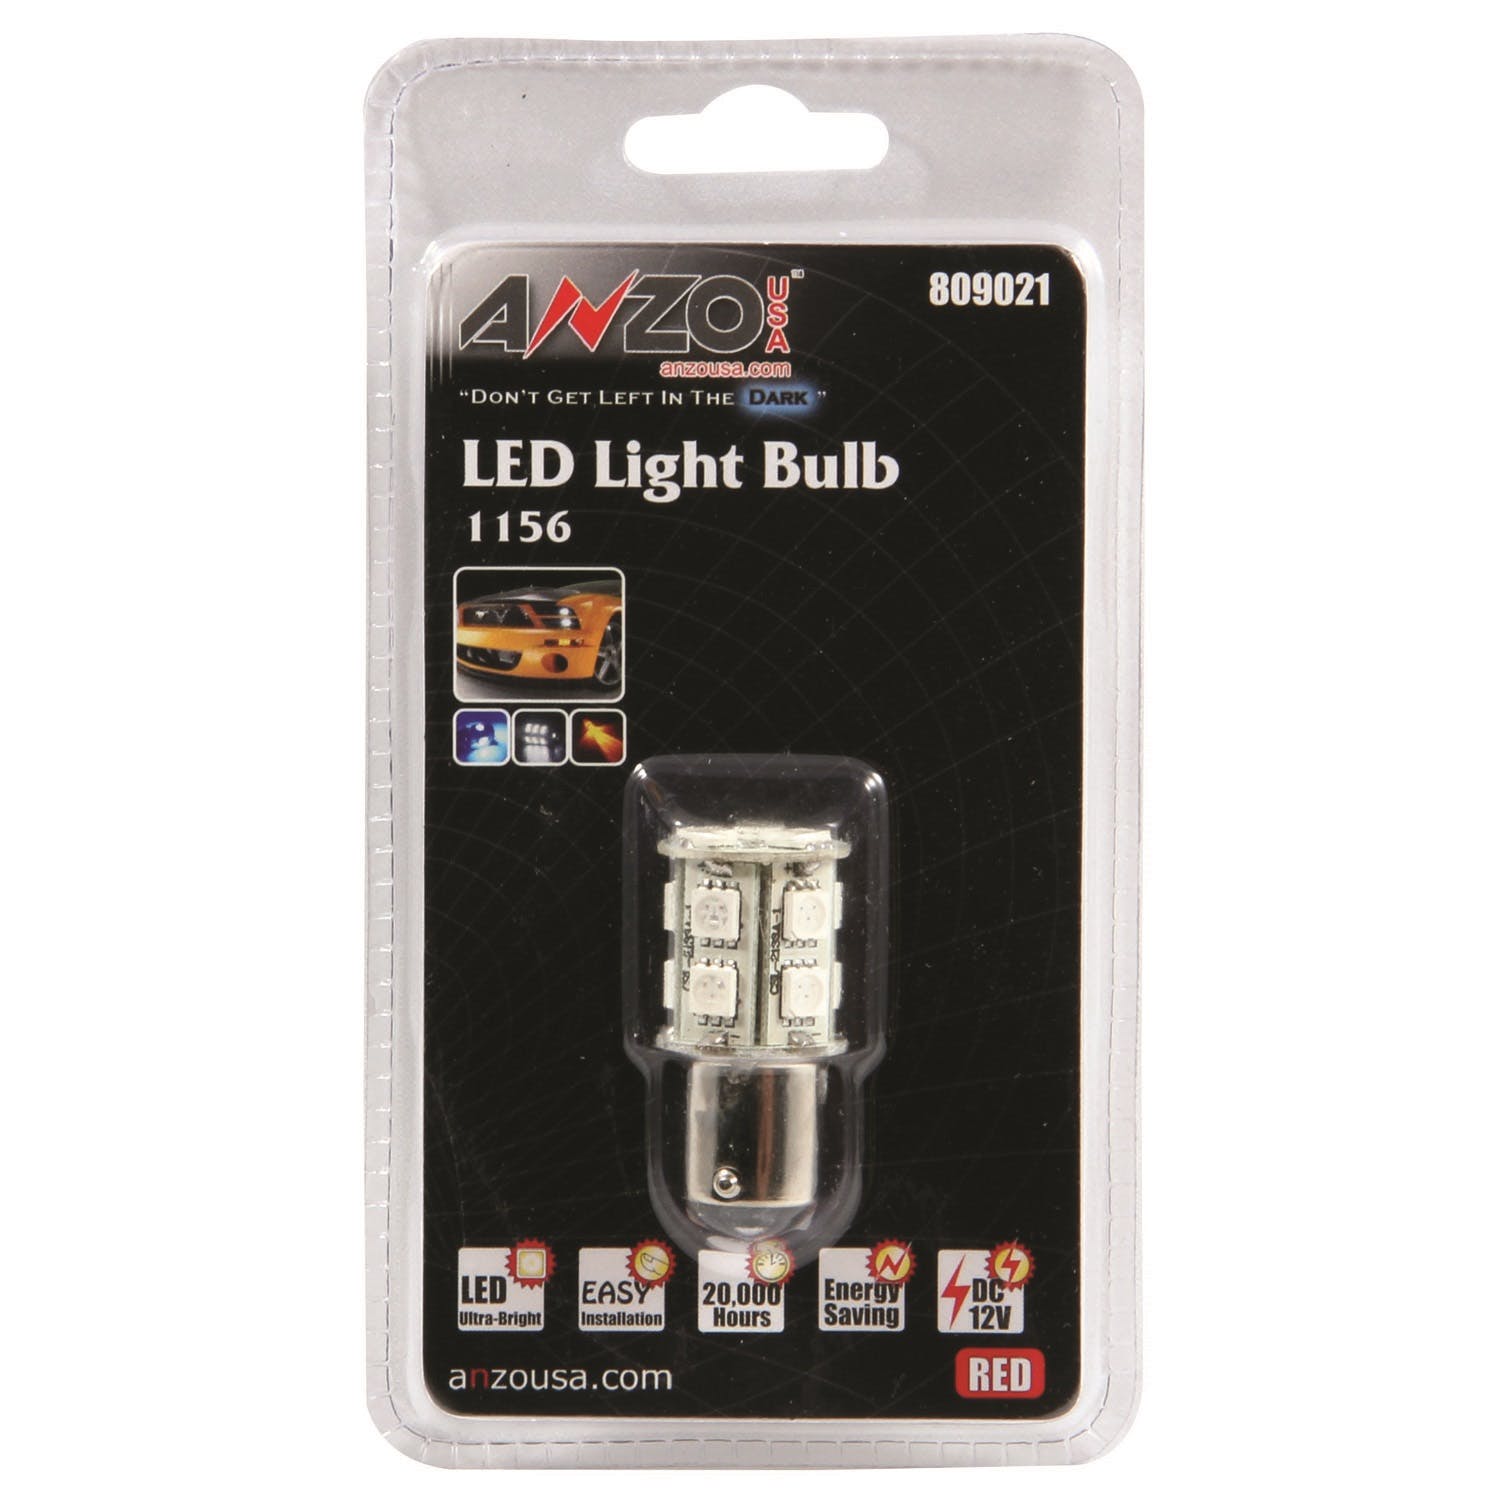 AnzoUSA 809021 LED 1156 Red - 13 LED's 1 3/4" Tall